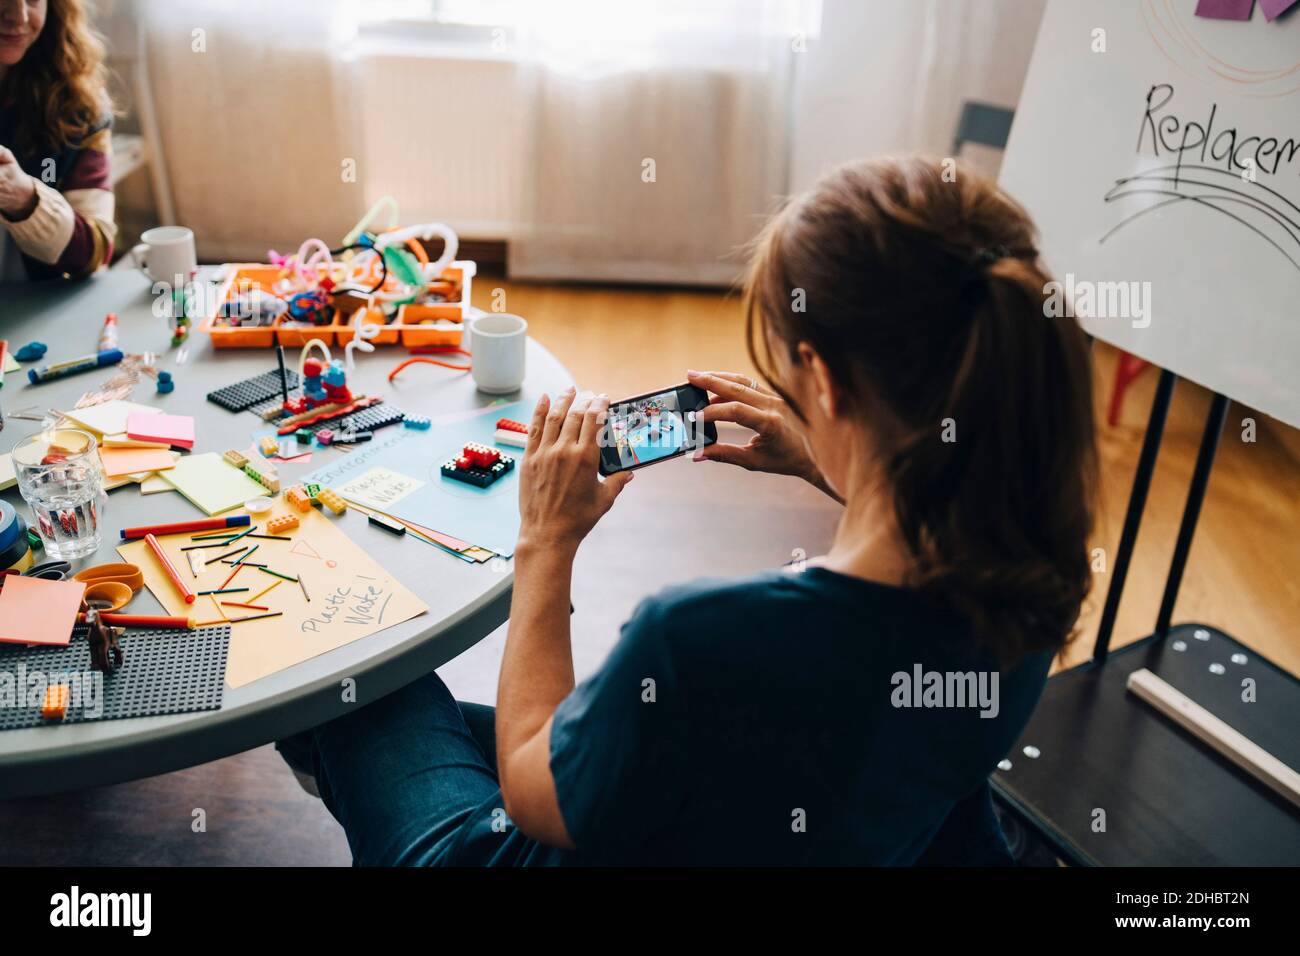 High angle rear view of businesswoman photographing stationery on table at creative office Stock Photo